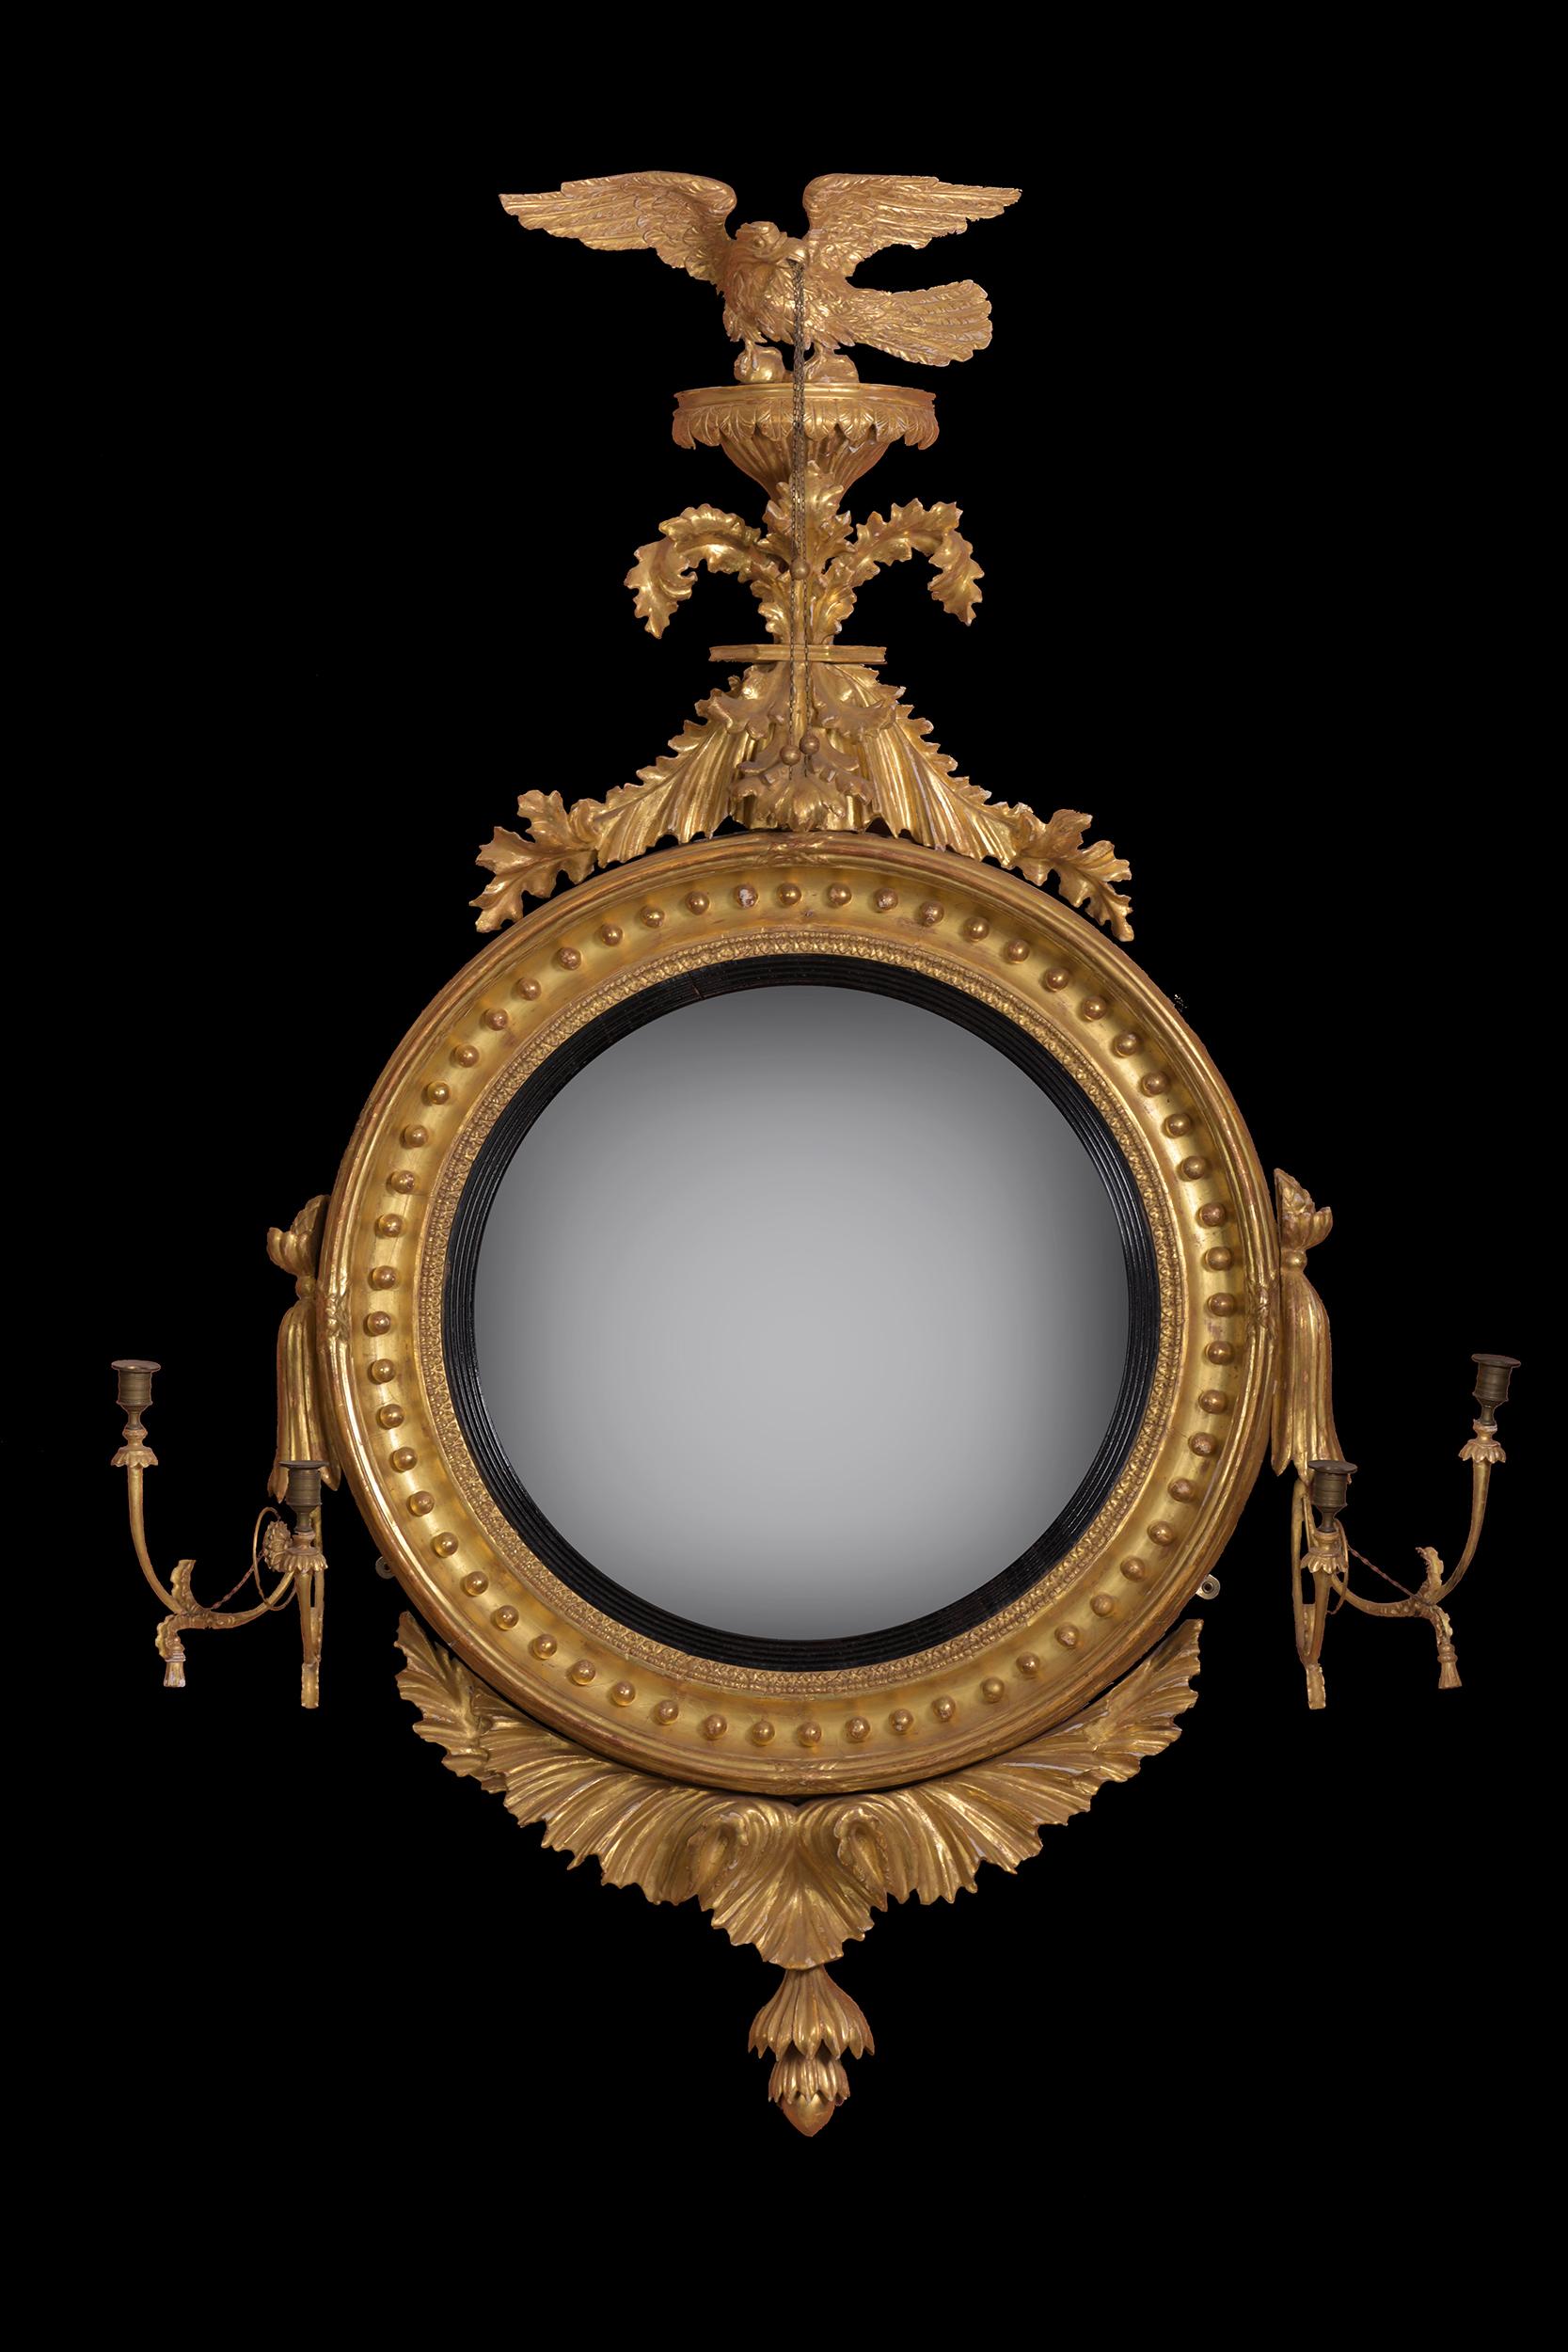 A very fine Regency period carved giltwood and Gesso convex mirror, the plate within a reeded ebonized slip with ball decoration surmounted by an Eagle pediment. It has sconces to either side with the original gilt brass candleholders and sunburst